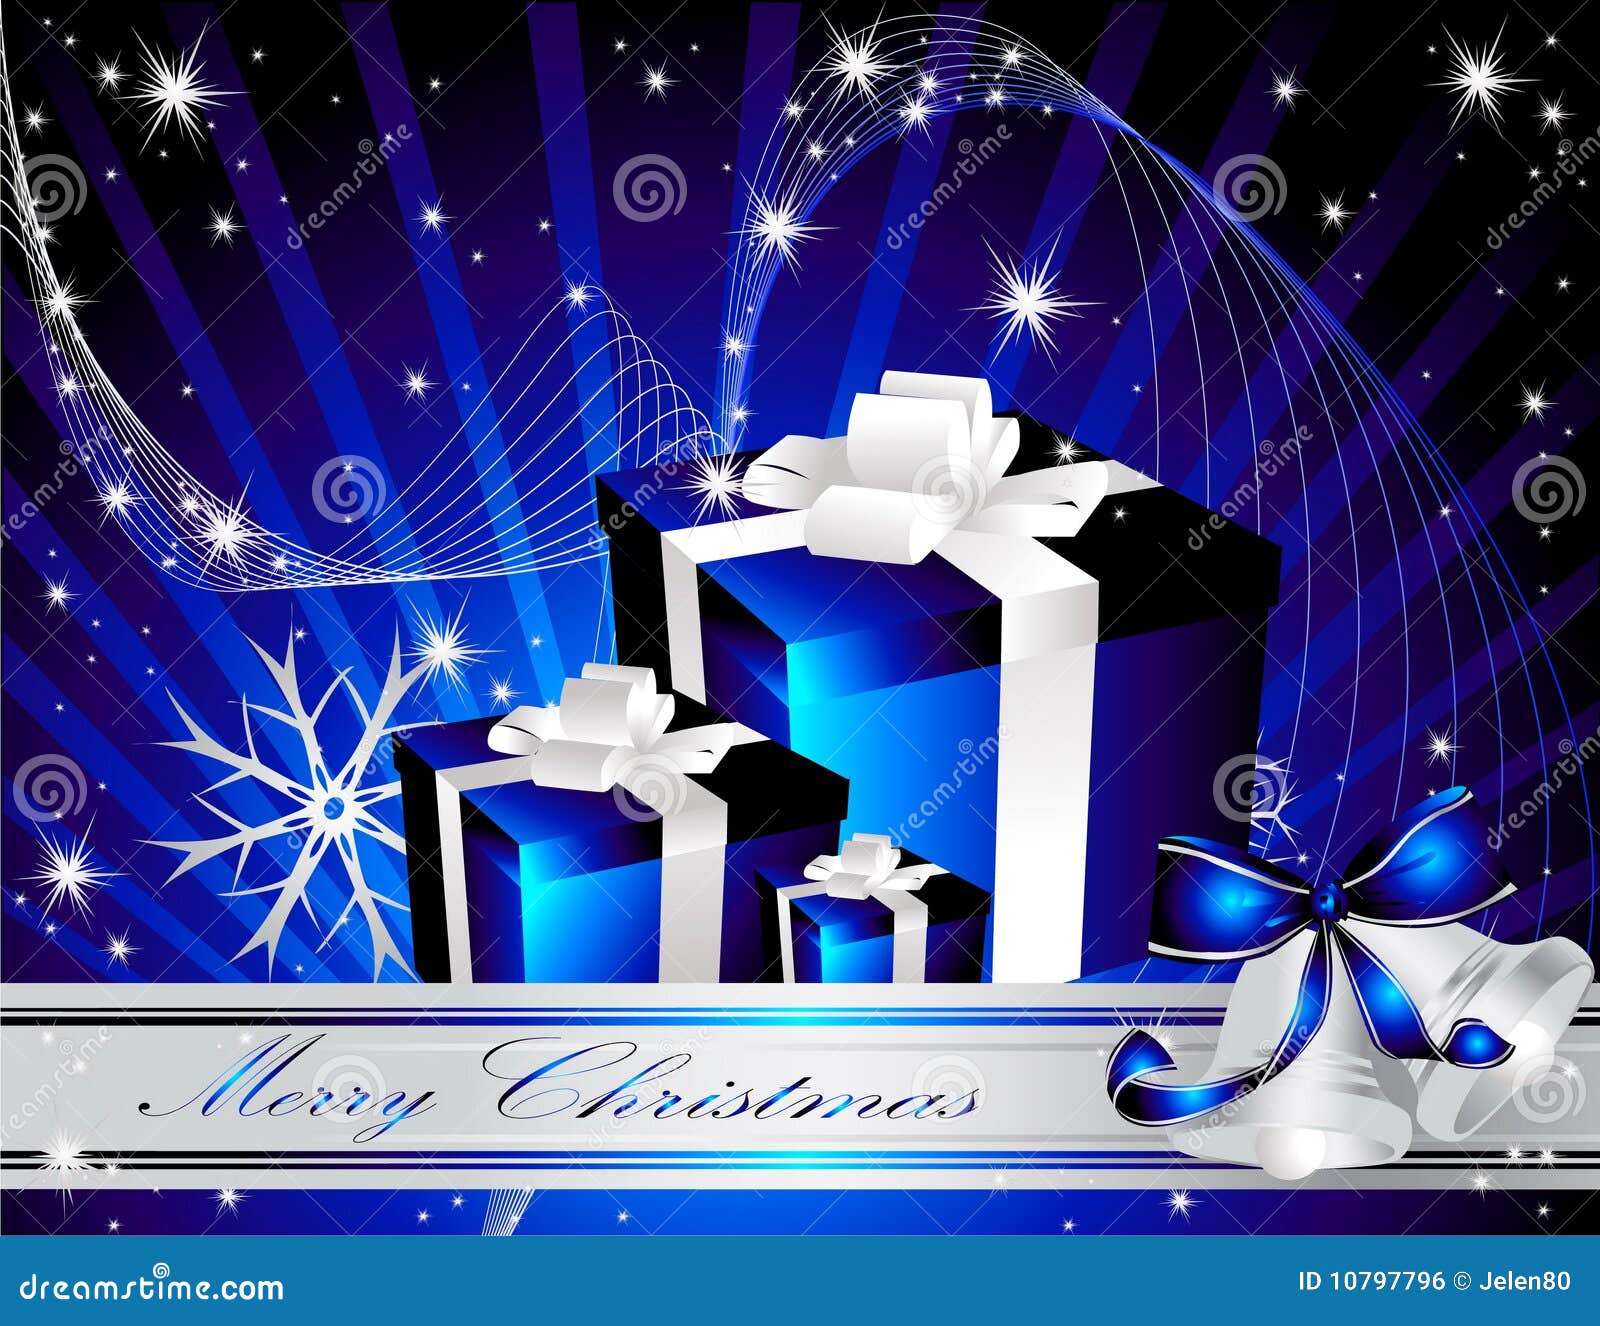 Merry Christmas background stock vector. Illustration of silver - 10797796